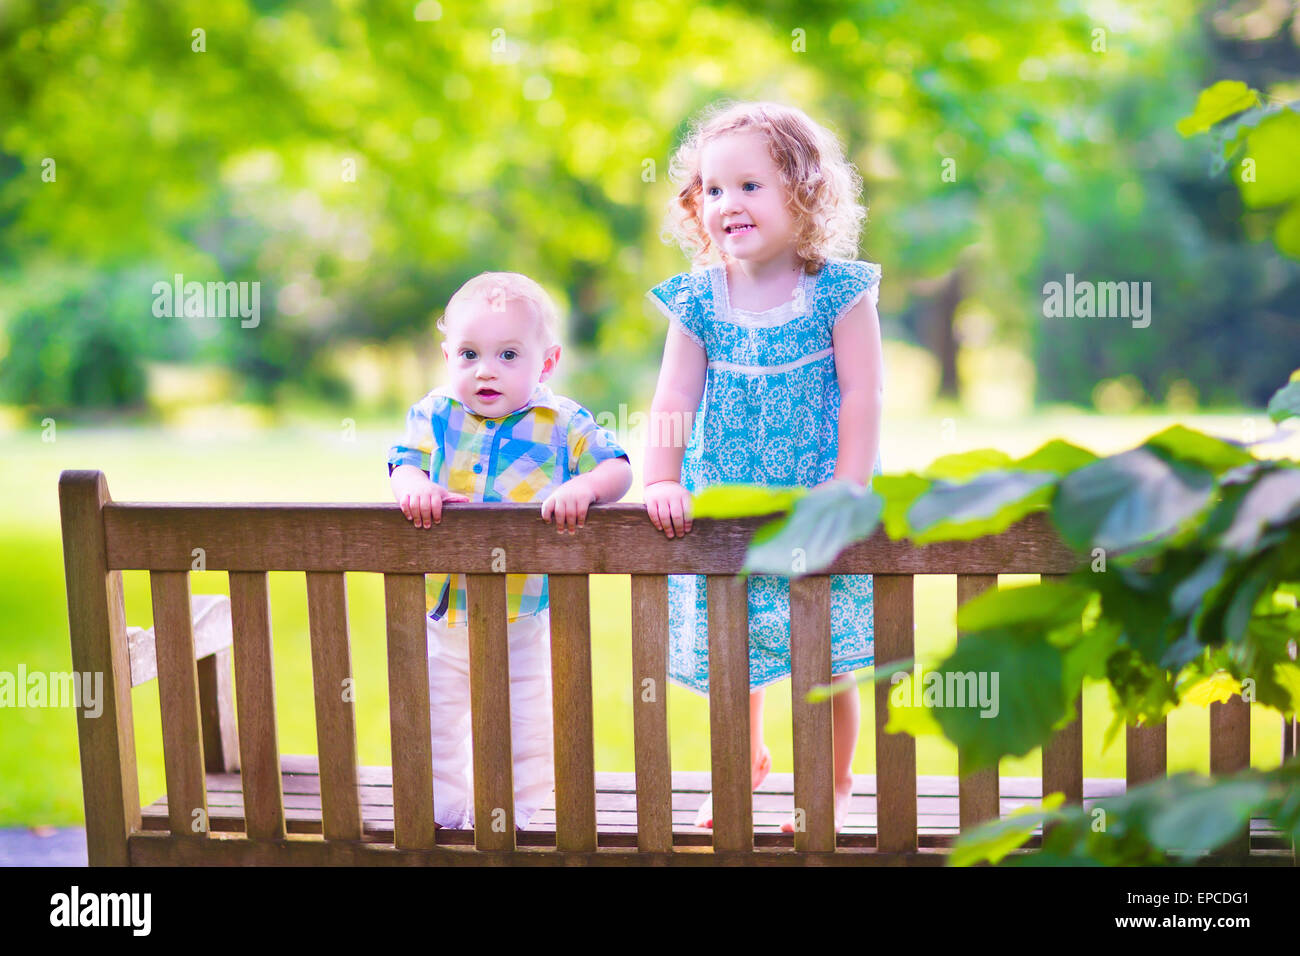 Adorable kids, little curly girl and a cute baby boy, brother and sister, sitting together on a wooden bench in a garden Stock Photo